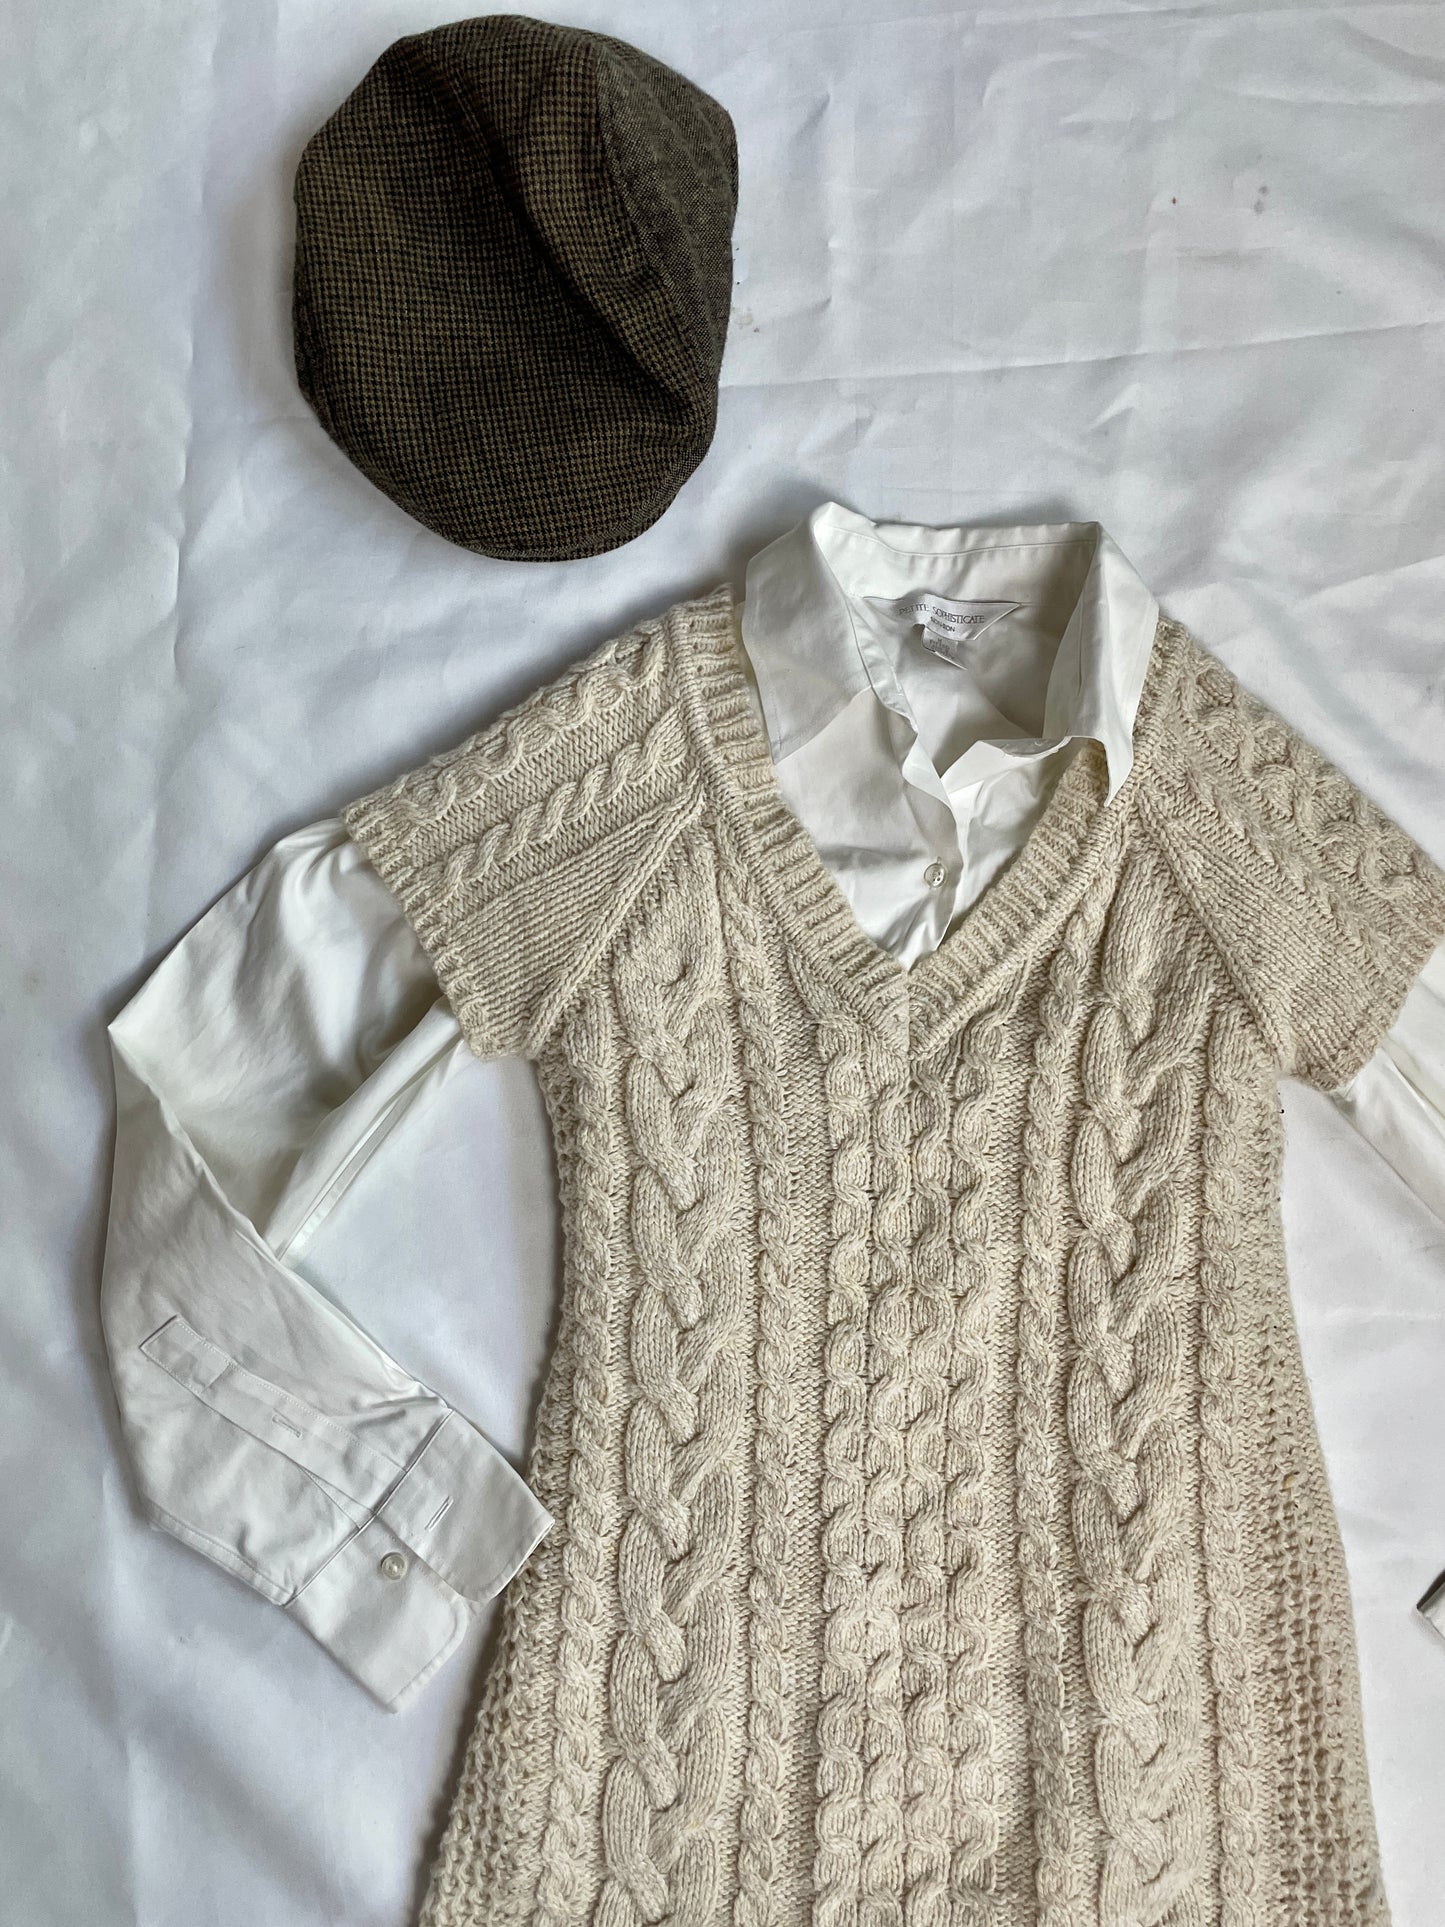 FALL inspired outfit bundle - sweater dress + button down + hat